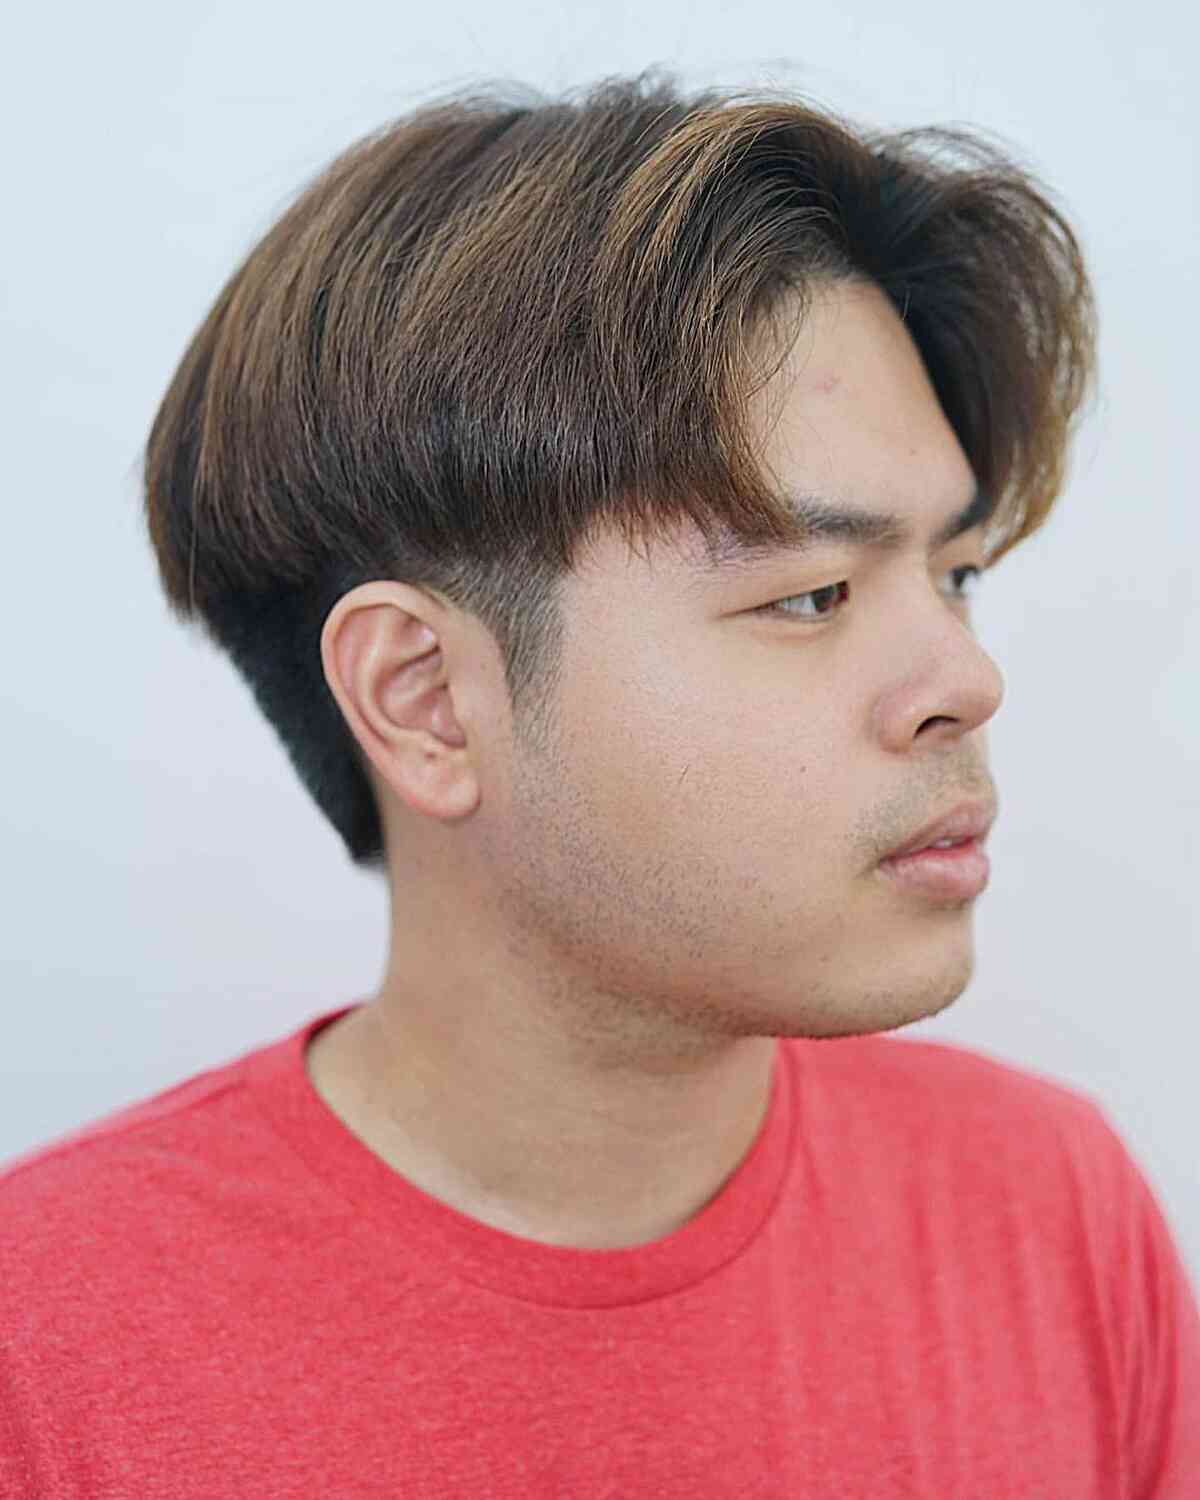 Modern Middle-Parted Bowl Two-Block Cut for Men's Straight Hair